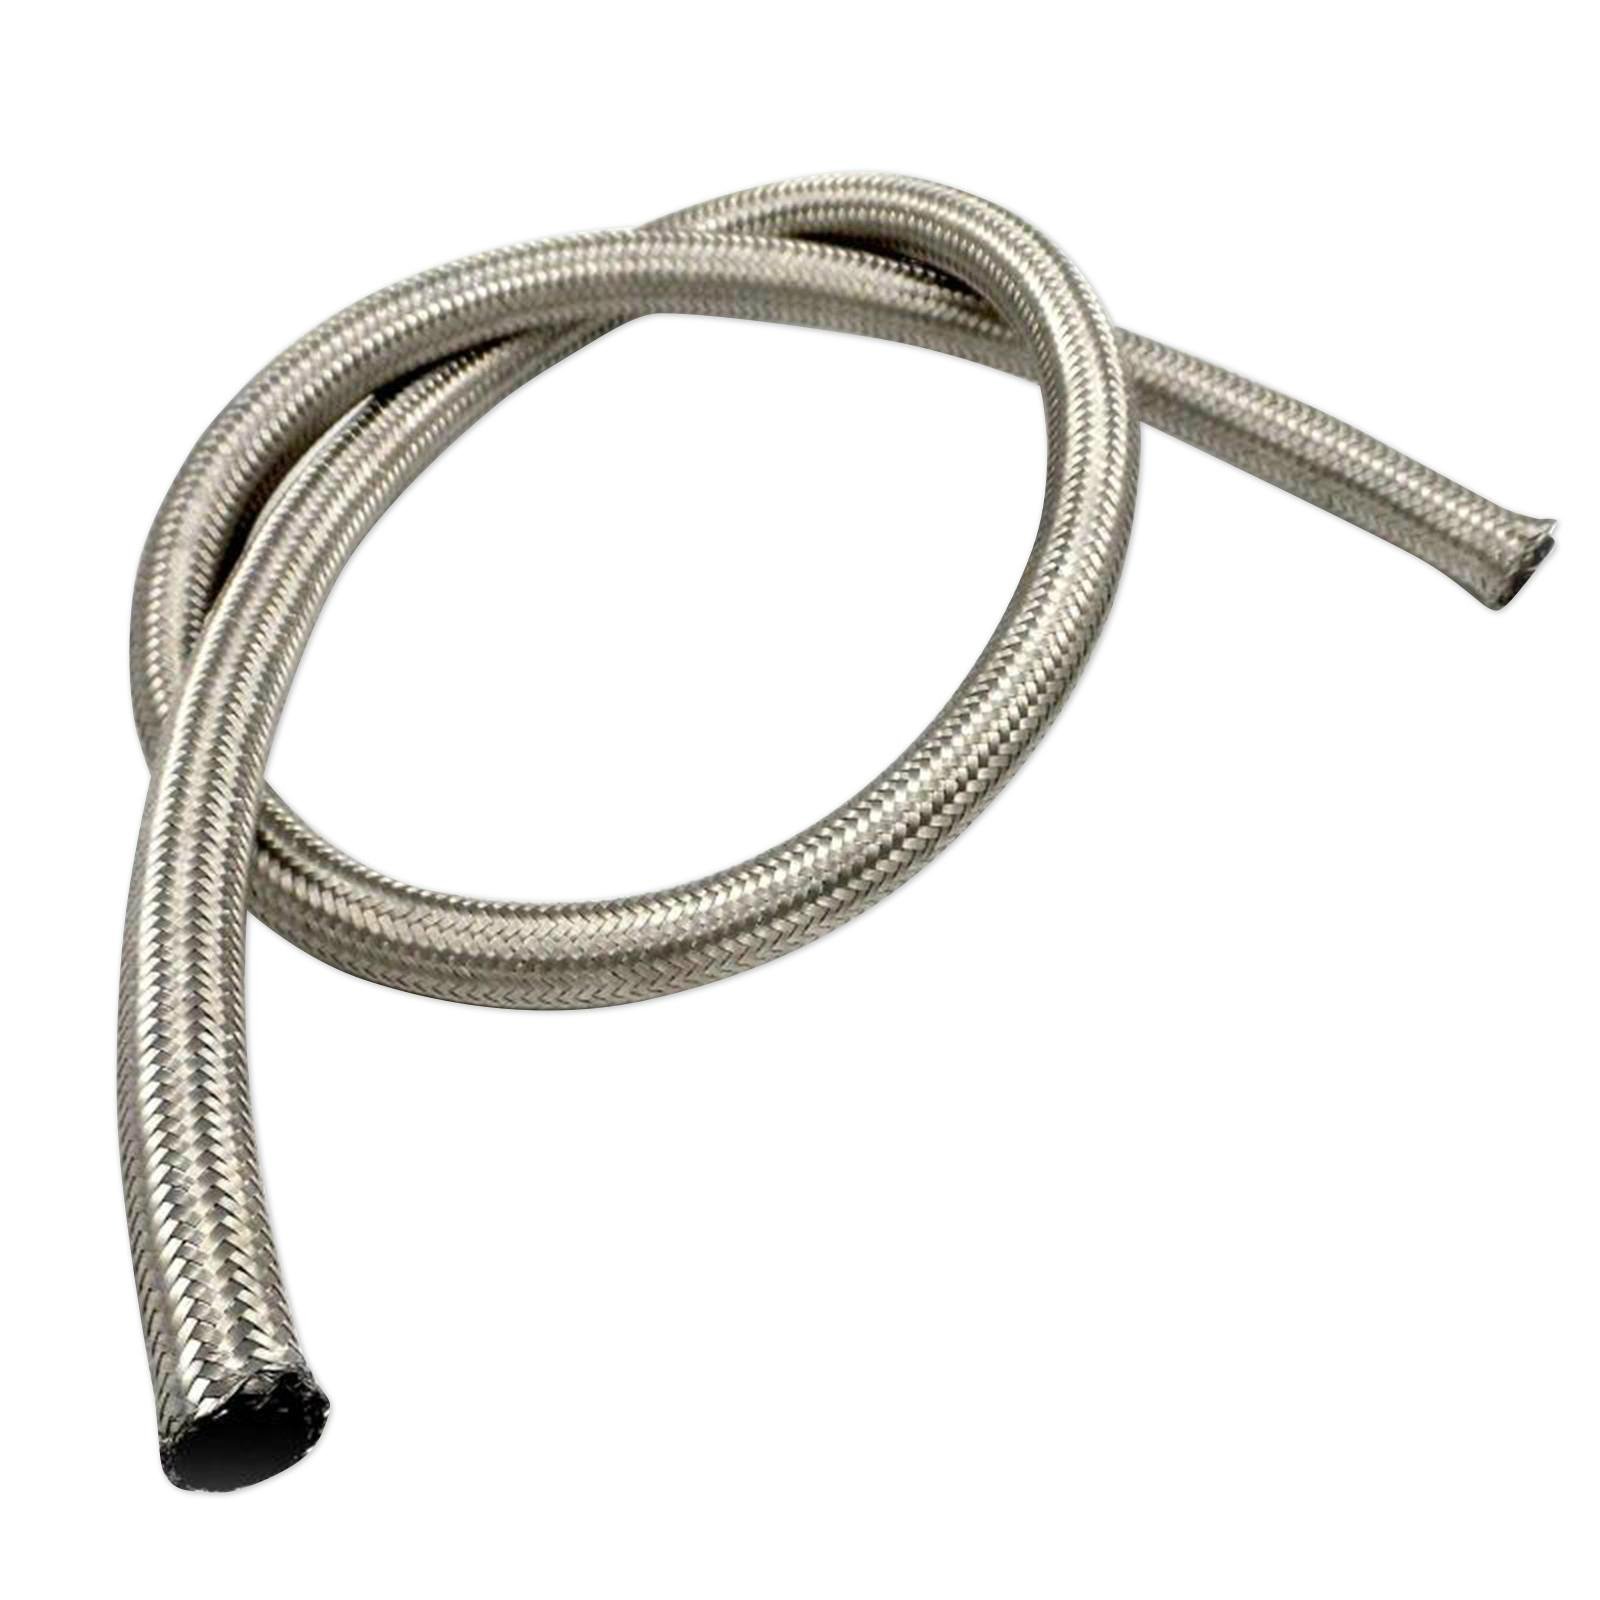 China OEM Manufacturer Flexible 6 AN Nylon / Stainless Steel Braided Fuel Line H